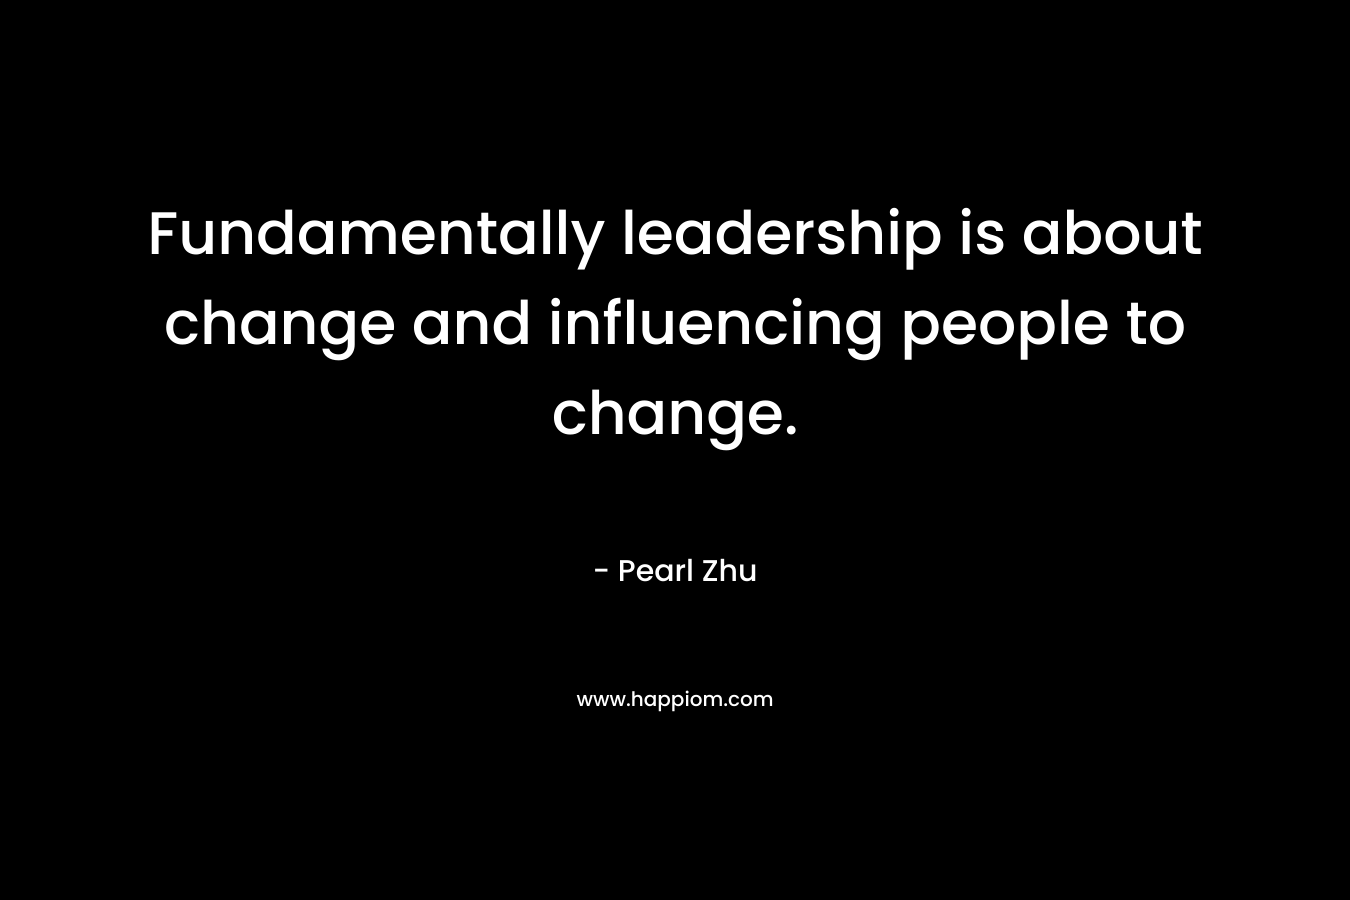 Fundamentally leadership is about change and influencing people to change. – Pearl Zhu